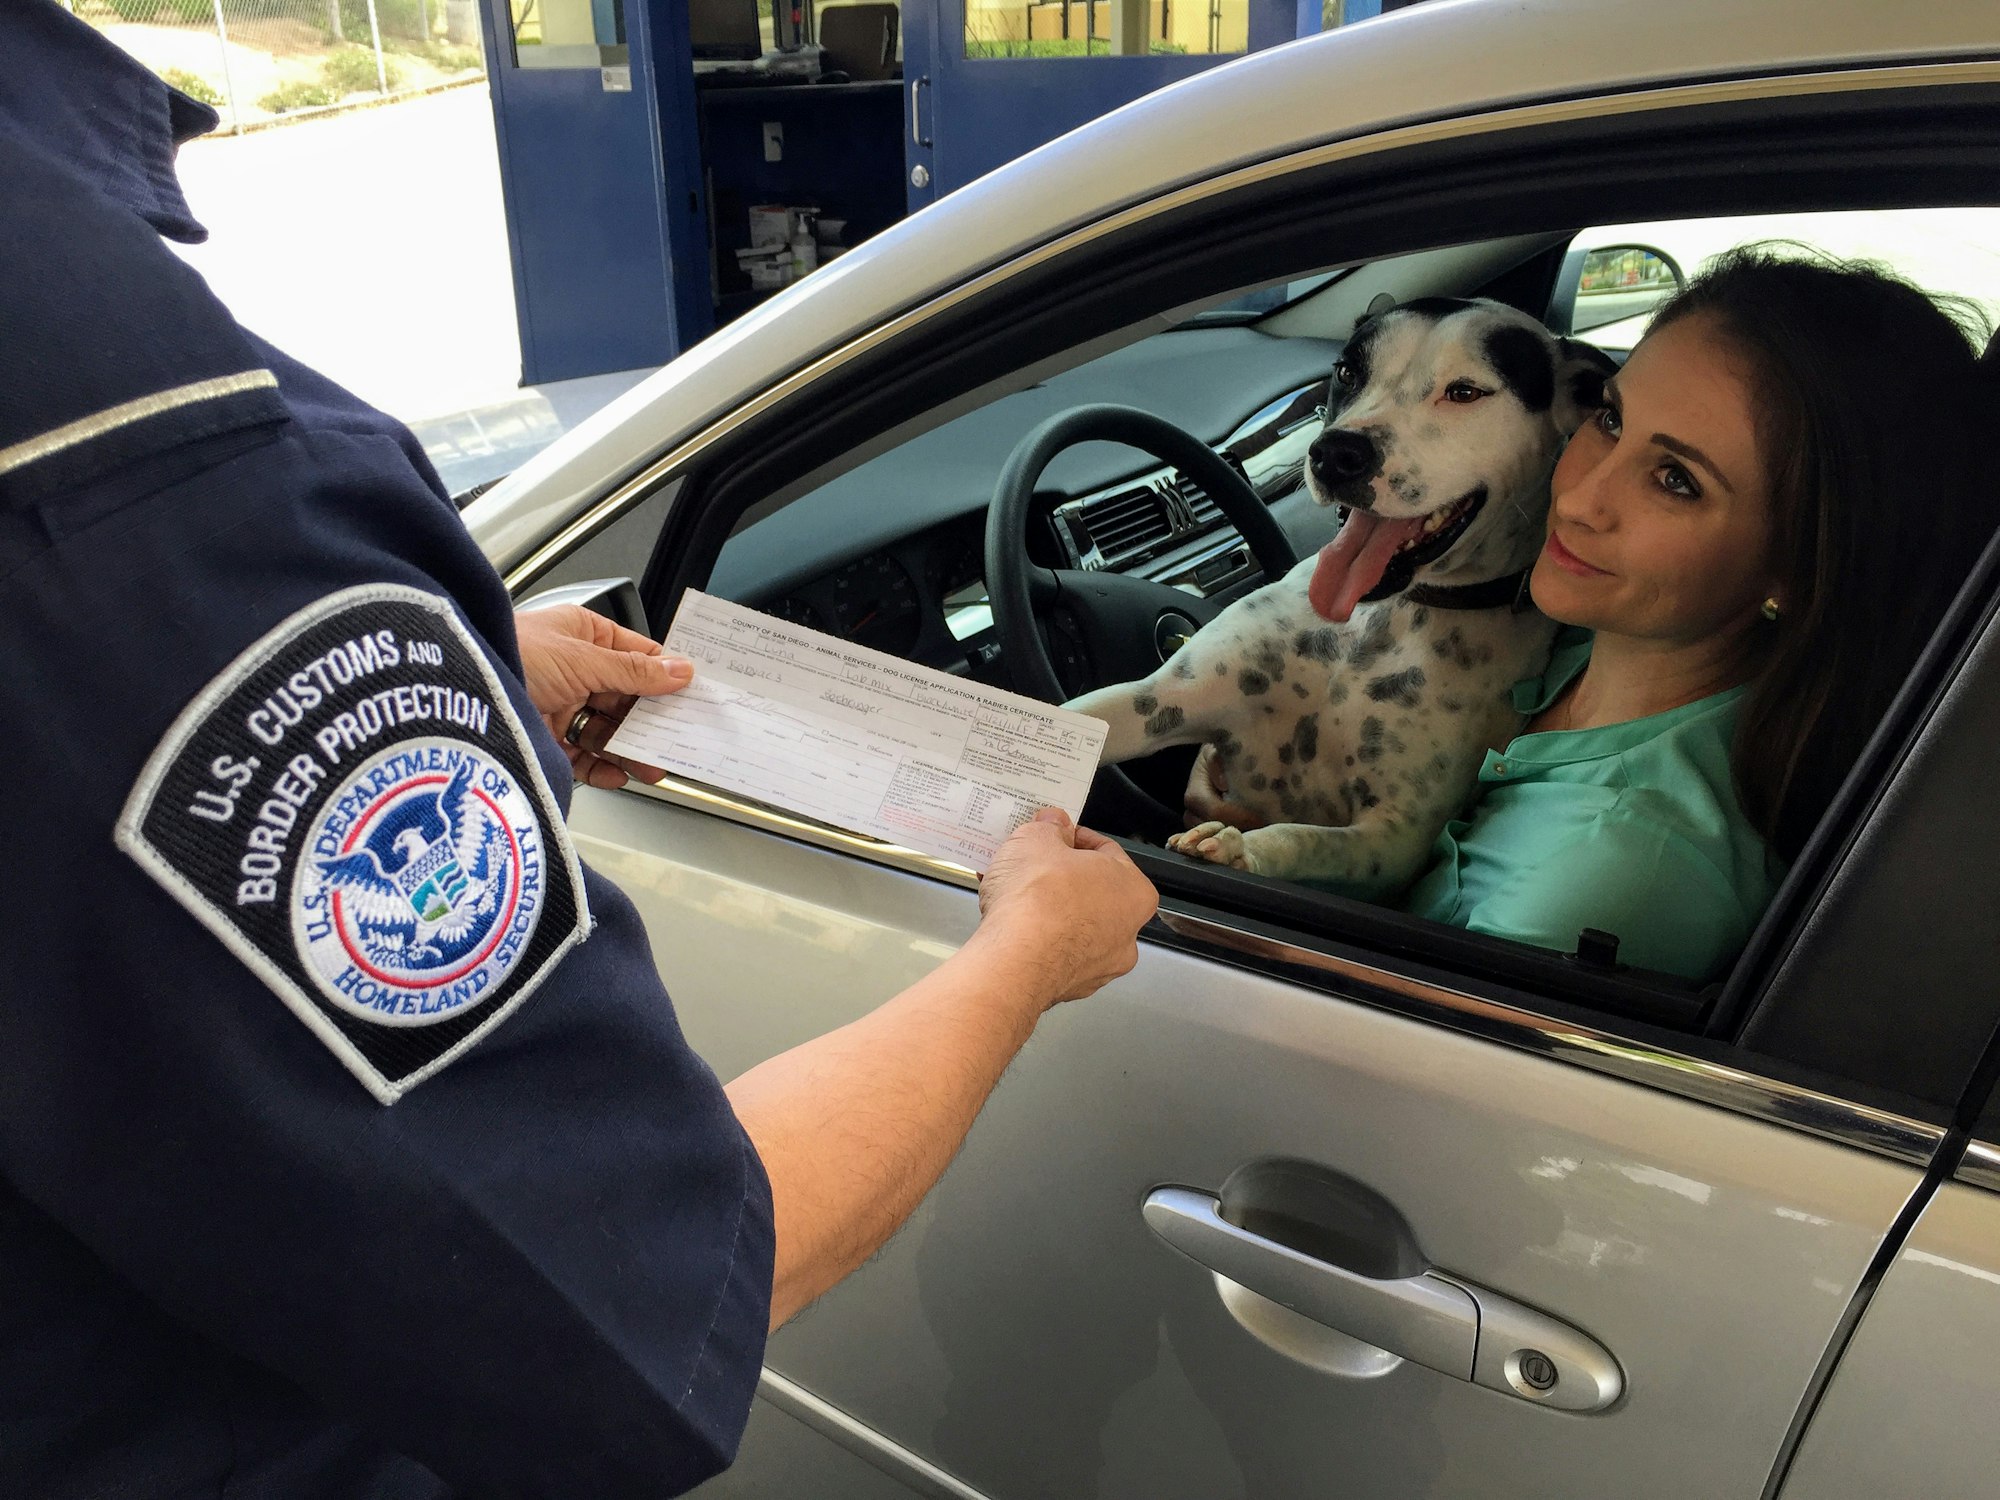 Captured in June 2017, this image depicted a Mexican woman in the process of entering the United States, while in her vehicle. Her dog, also seen in the photograph, a Labrador mix, was accompanying her across the border. She had presented the U.S. Customs and Border Protection (CBP) officer, a copy of her Dog License Application & Rabies Certificate, which had been issued by the County of San Diego-Animal Services Division, as proof that her pet was up-to-date on his rabies vaccinations. This certificate is a required document, in order to grant travelers crossing into the U.S. with their pets